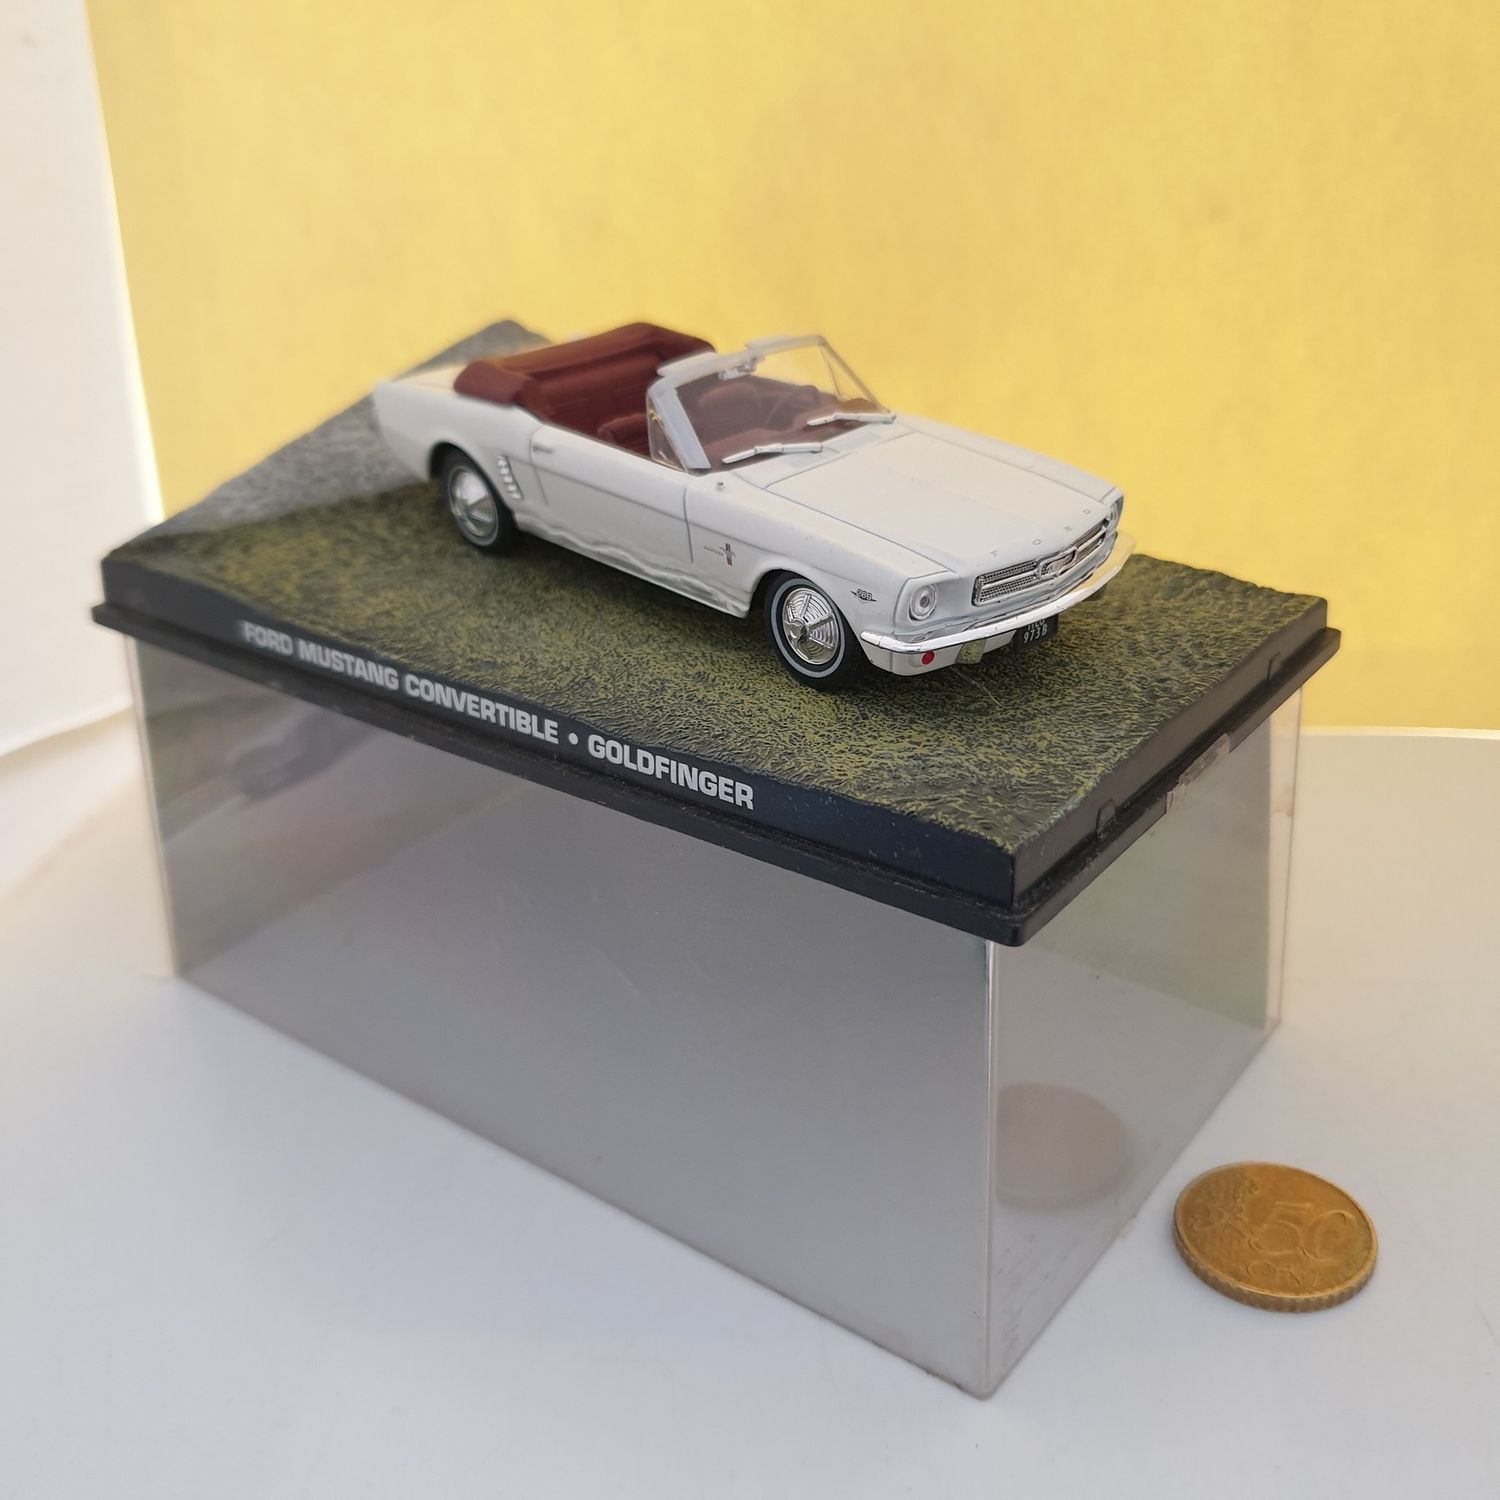 James Bond 007 Ford Mustang Convertible - Goldfinger - Scale 1/43 (YE277)